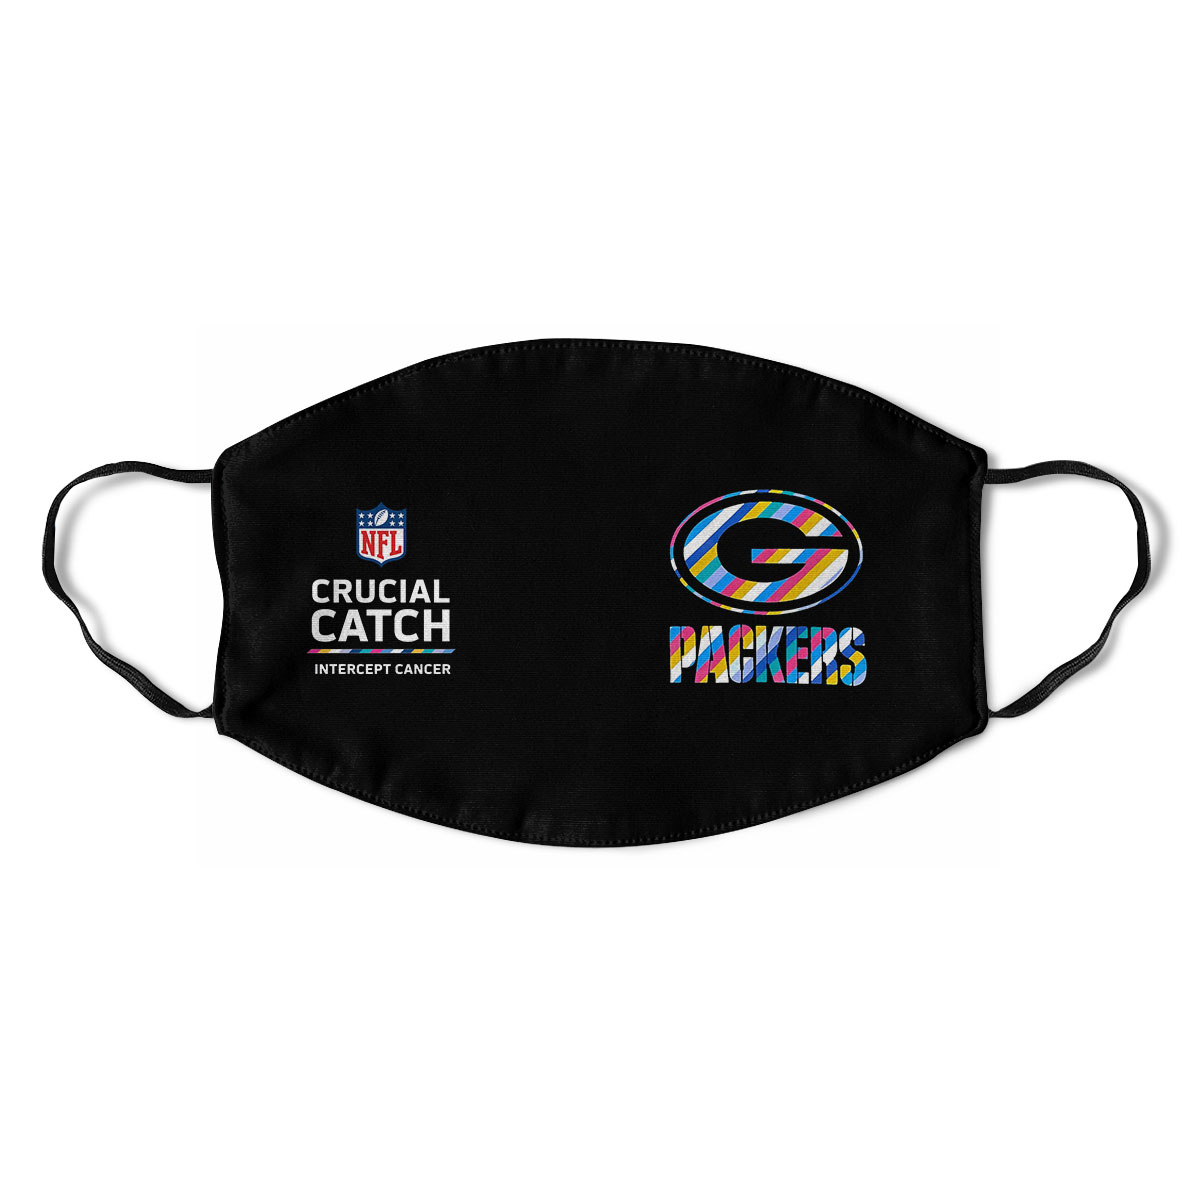 Green Bay Packers Nfl Crucial Catch Multicolor Face Mask Cloth